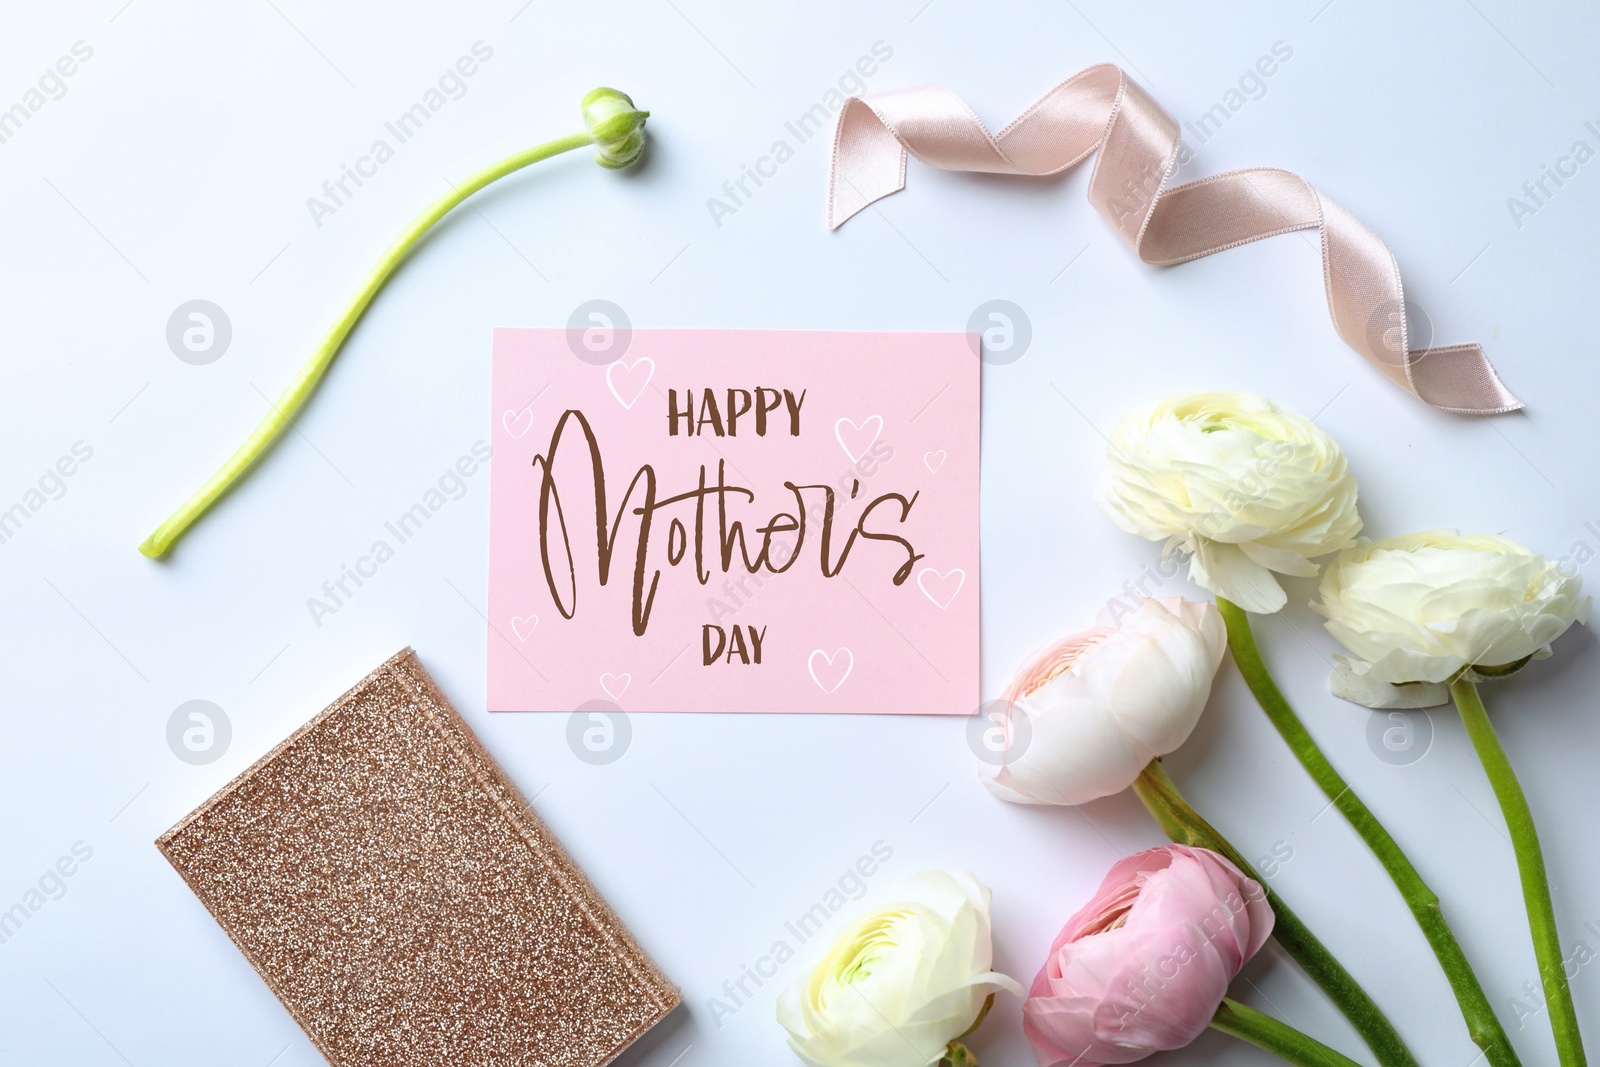 Image of Happy Mother's Day greeting card, beautiful ranunculus flowers, ribbon and notebook on light background, flat lay